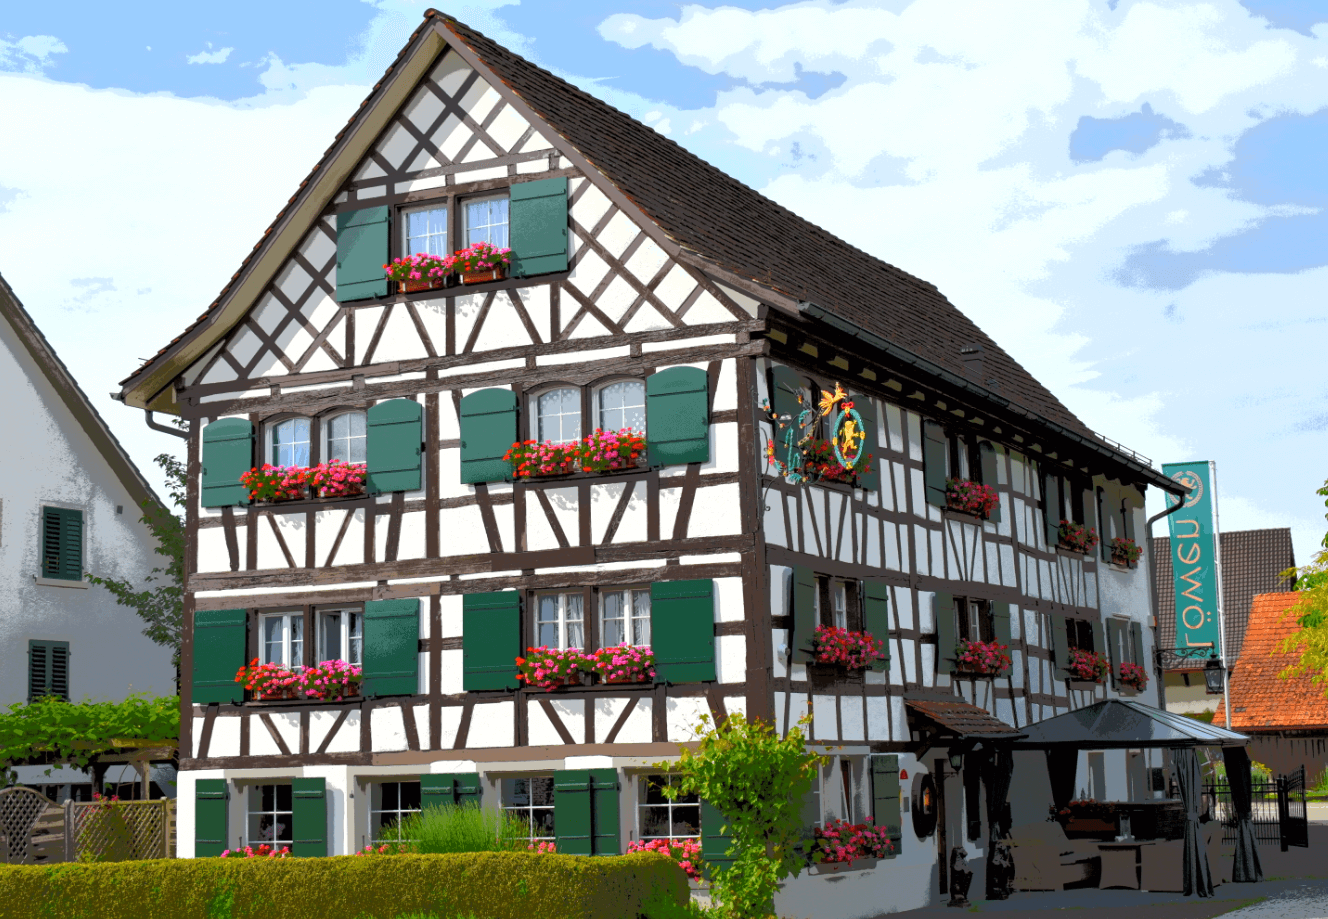 Half-timbered house with green shutters and colorful flower boxes